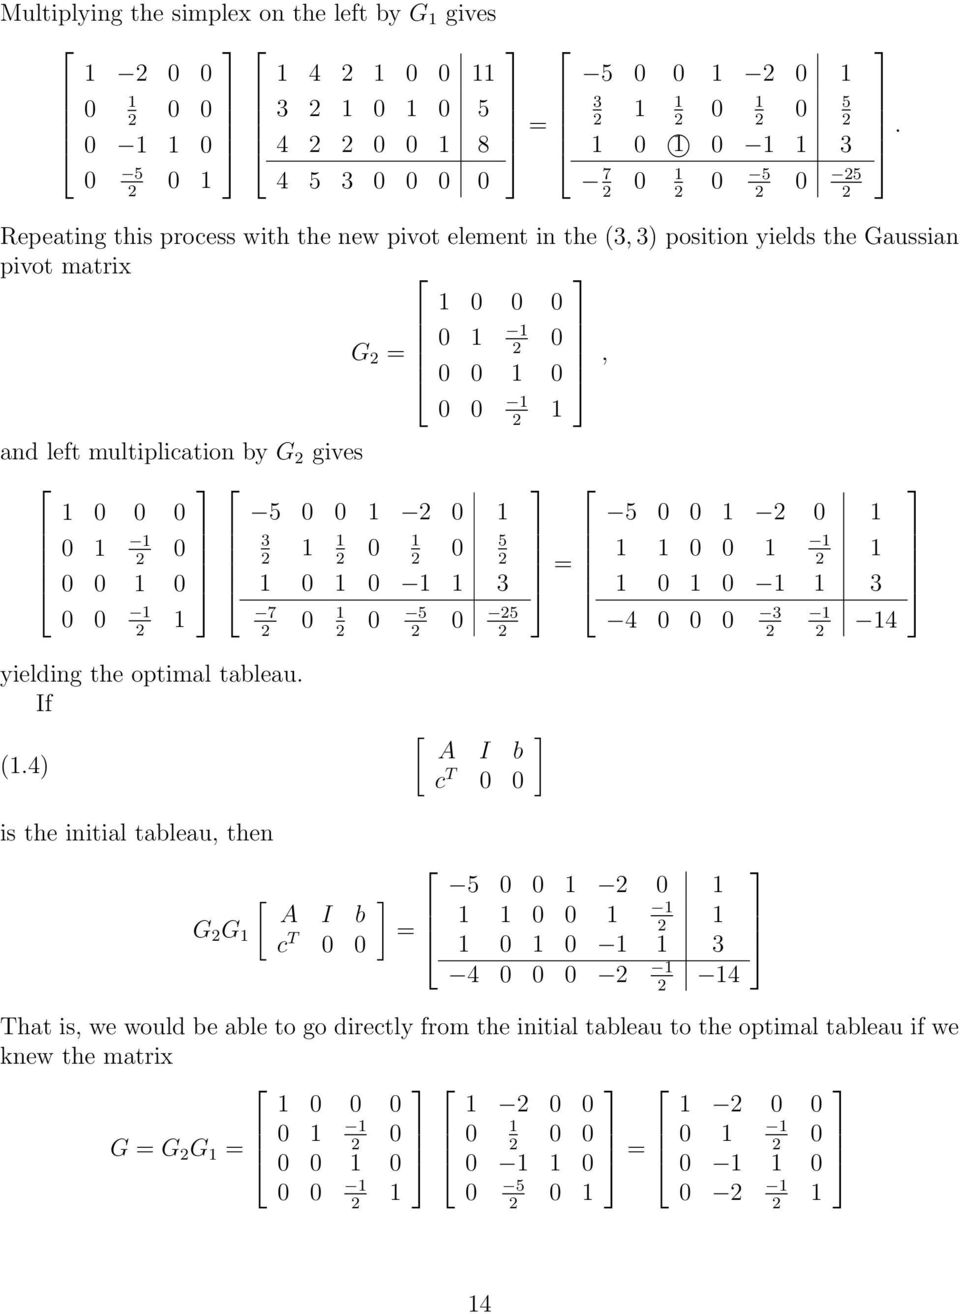 multiplication by G gives 5 3 5 3 7 5 5 5 = 3 3 4 4 yielding the optimal tableau. If (.